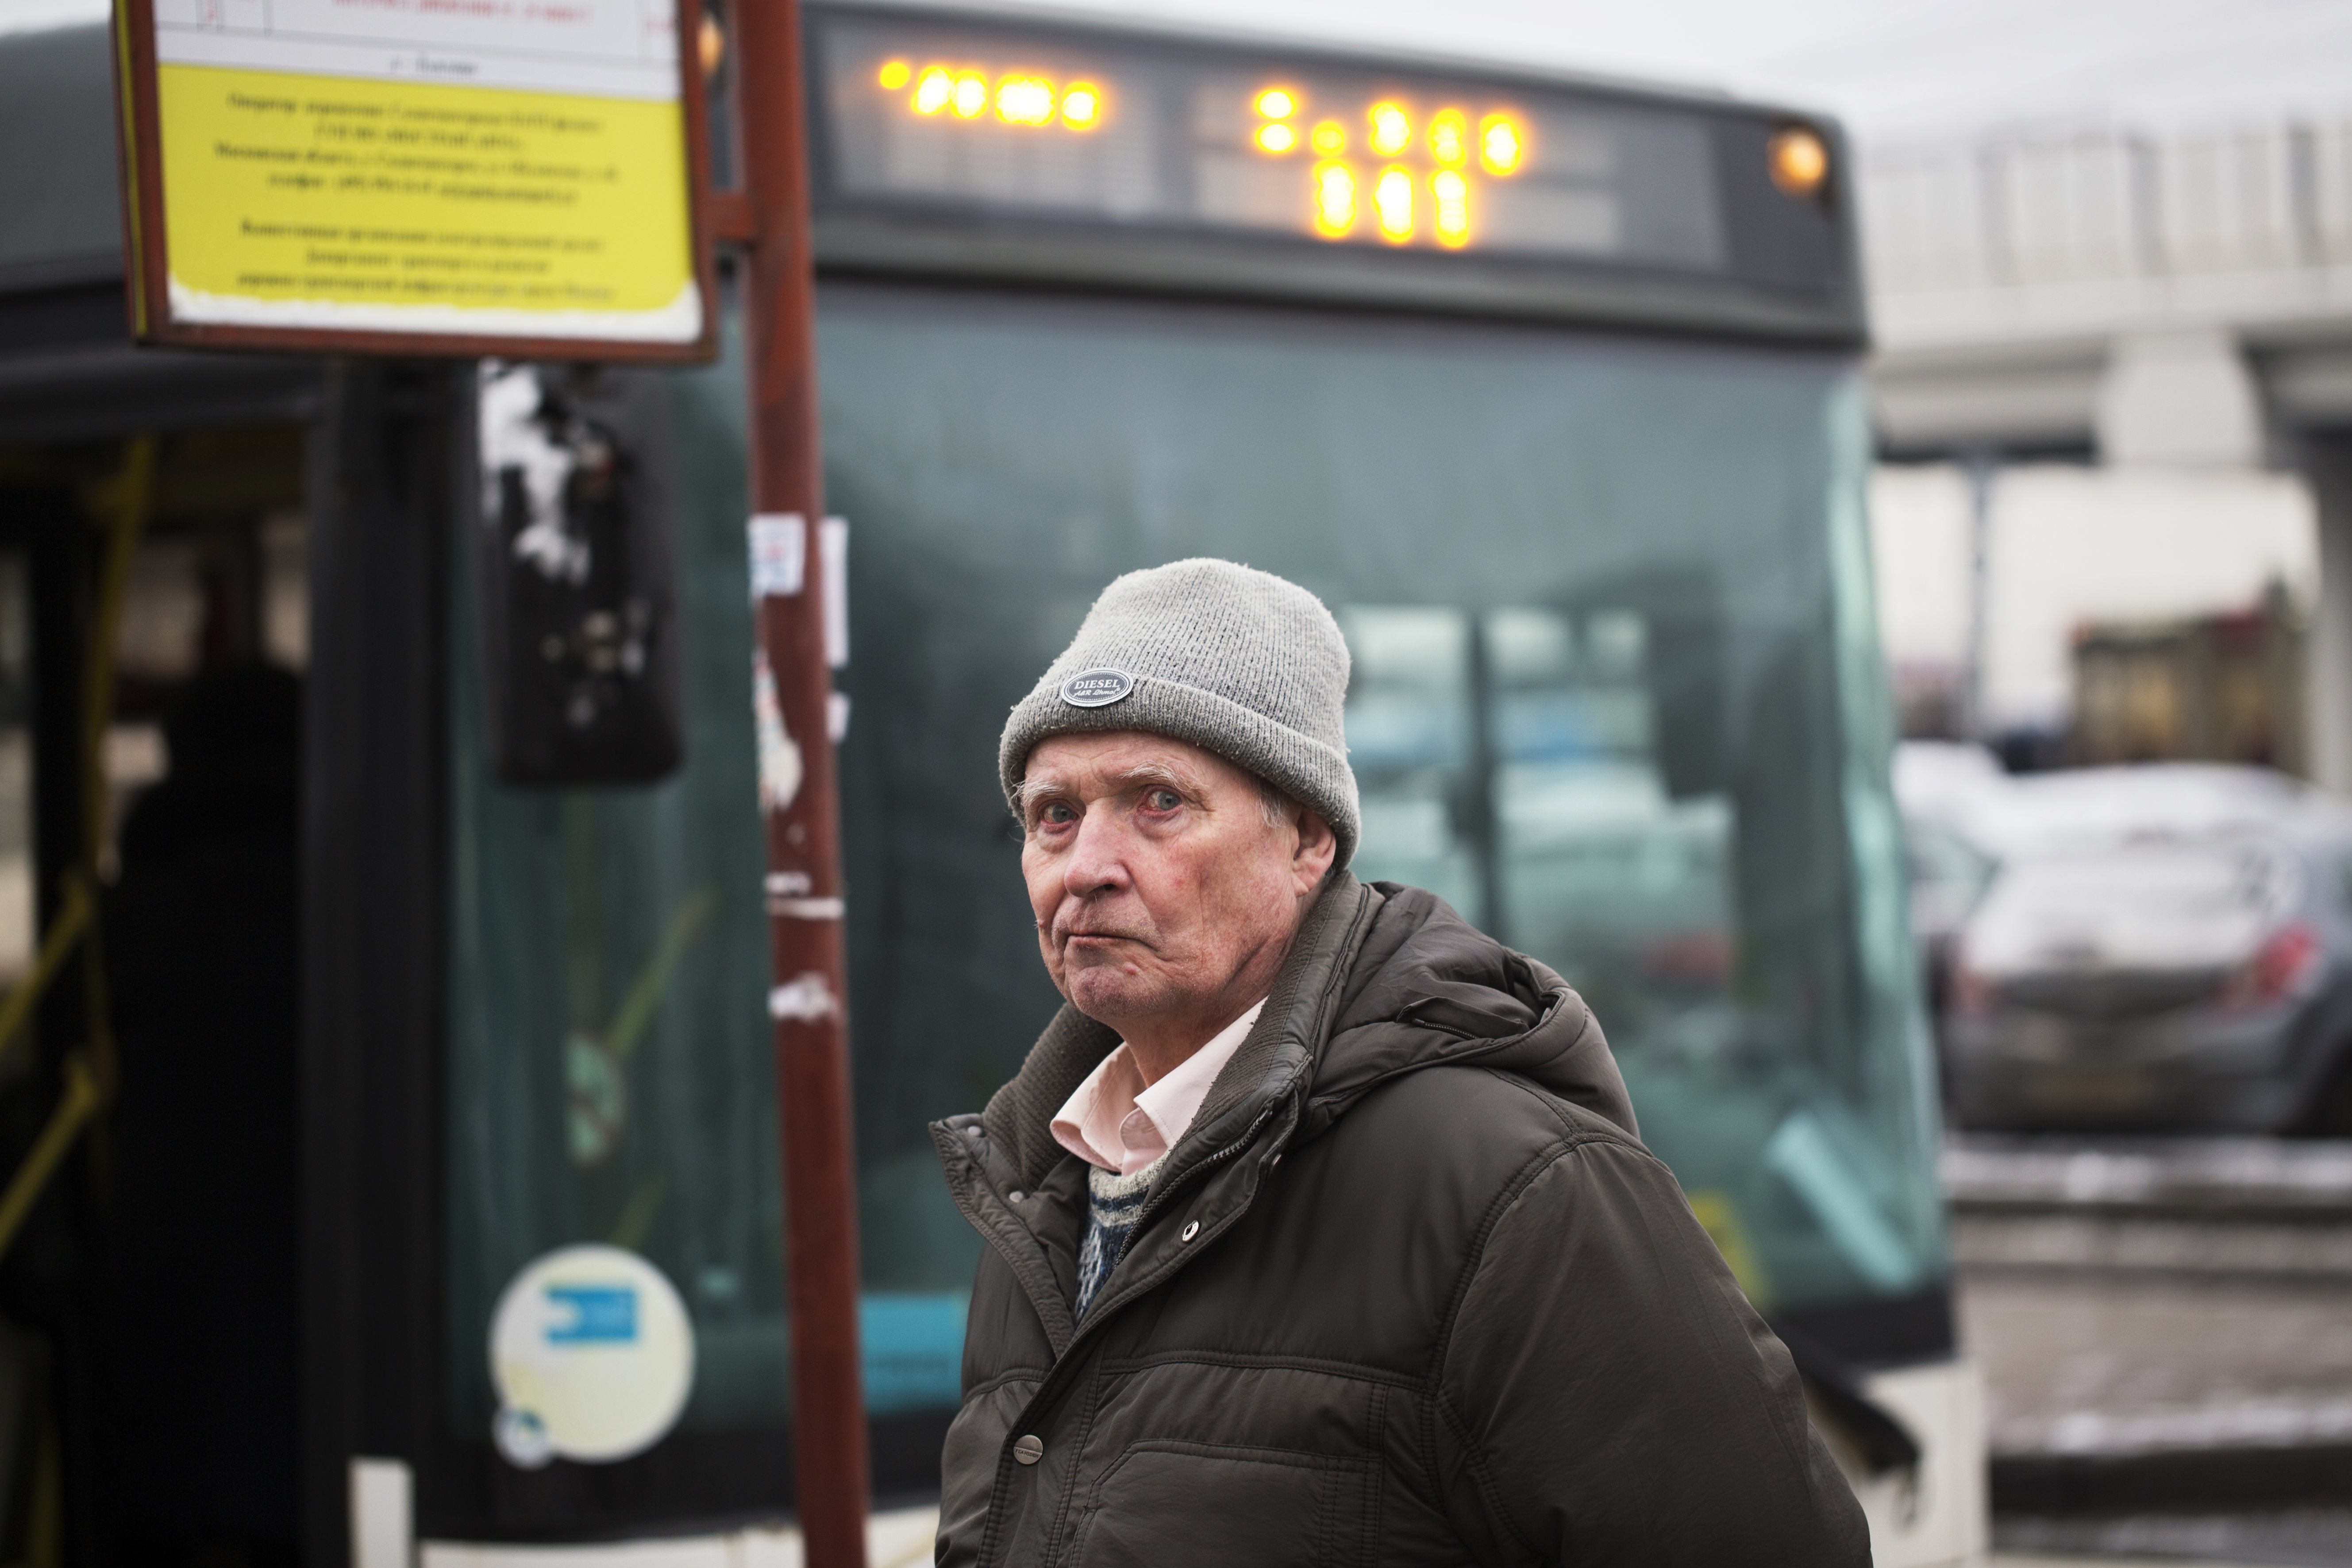 The old man at the bus stop | Source: Shutterstock